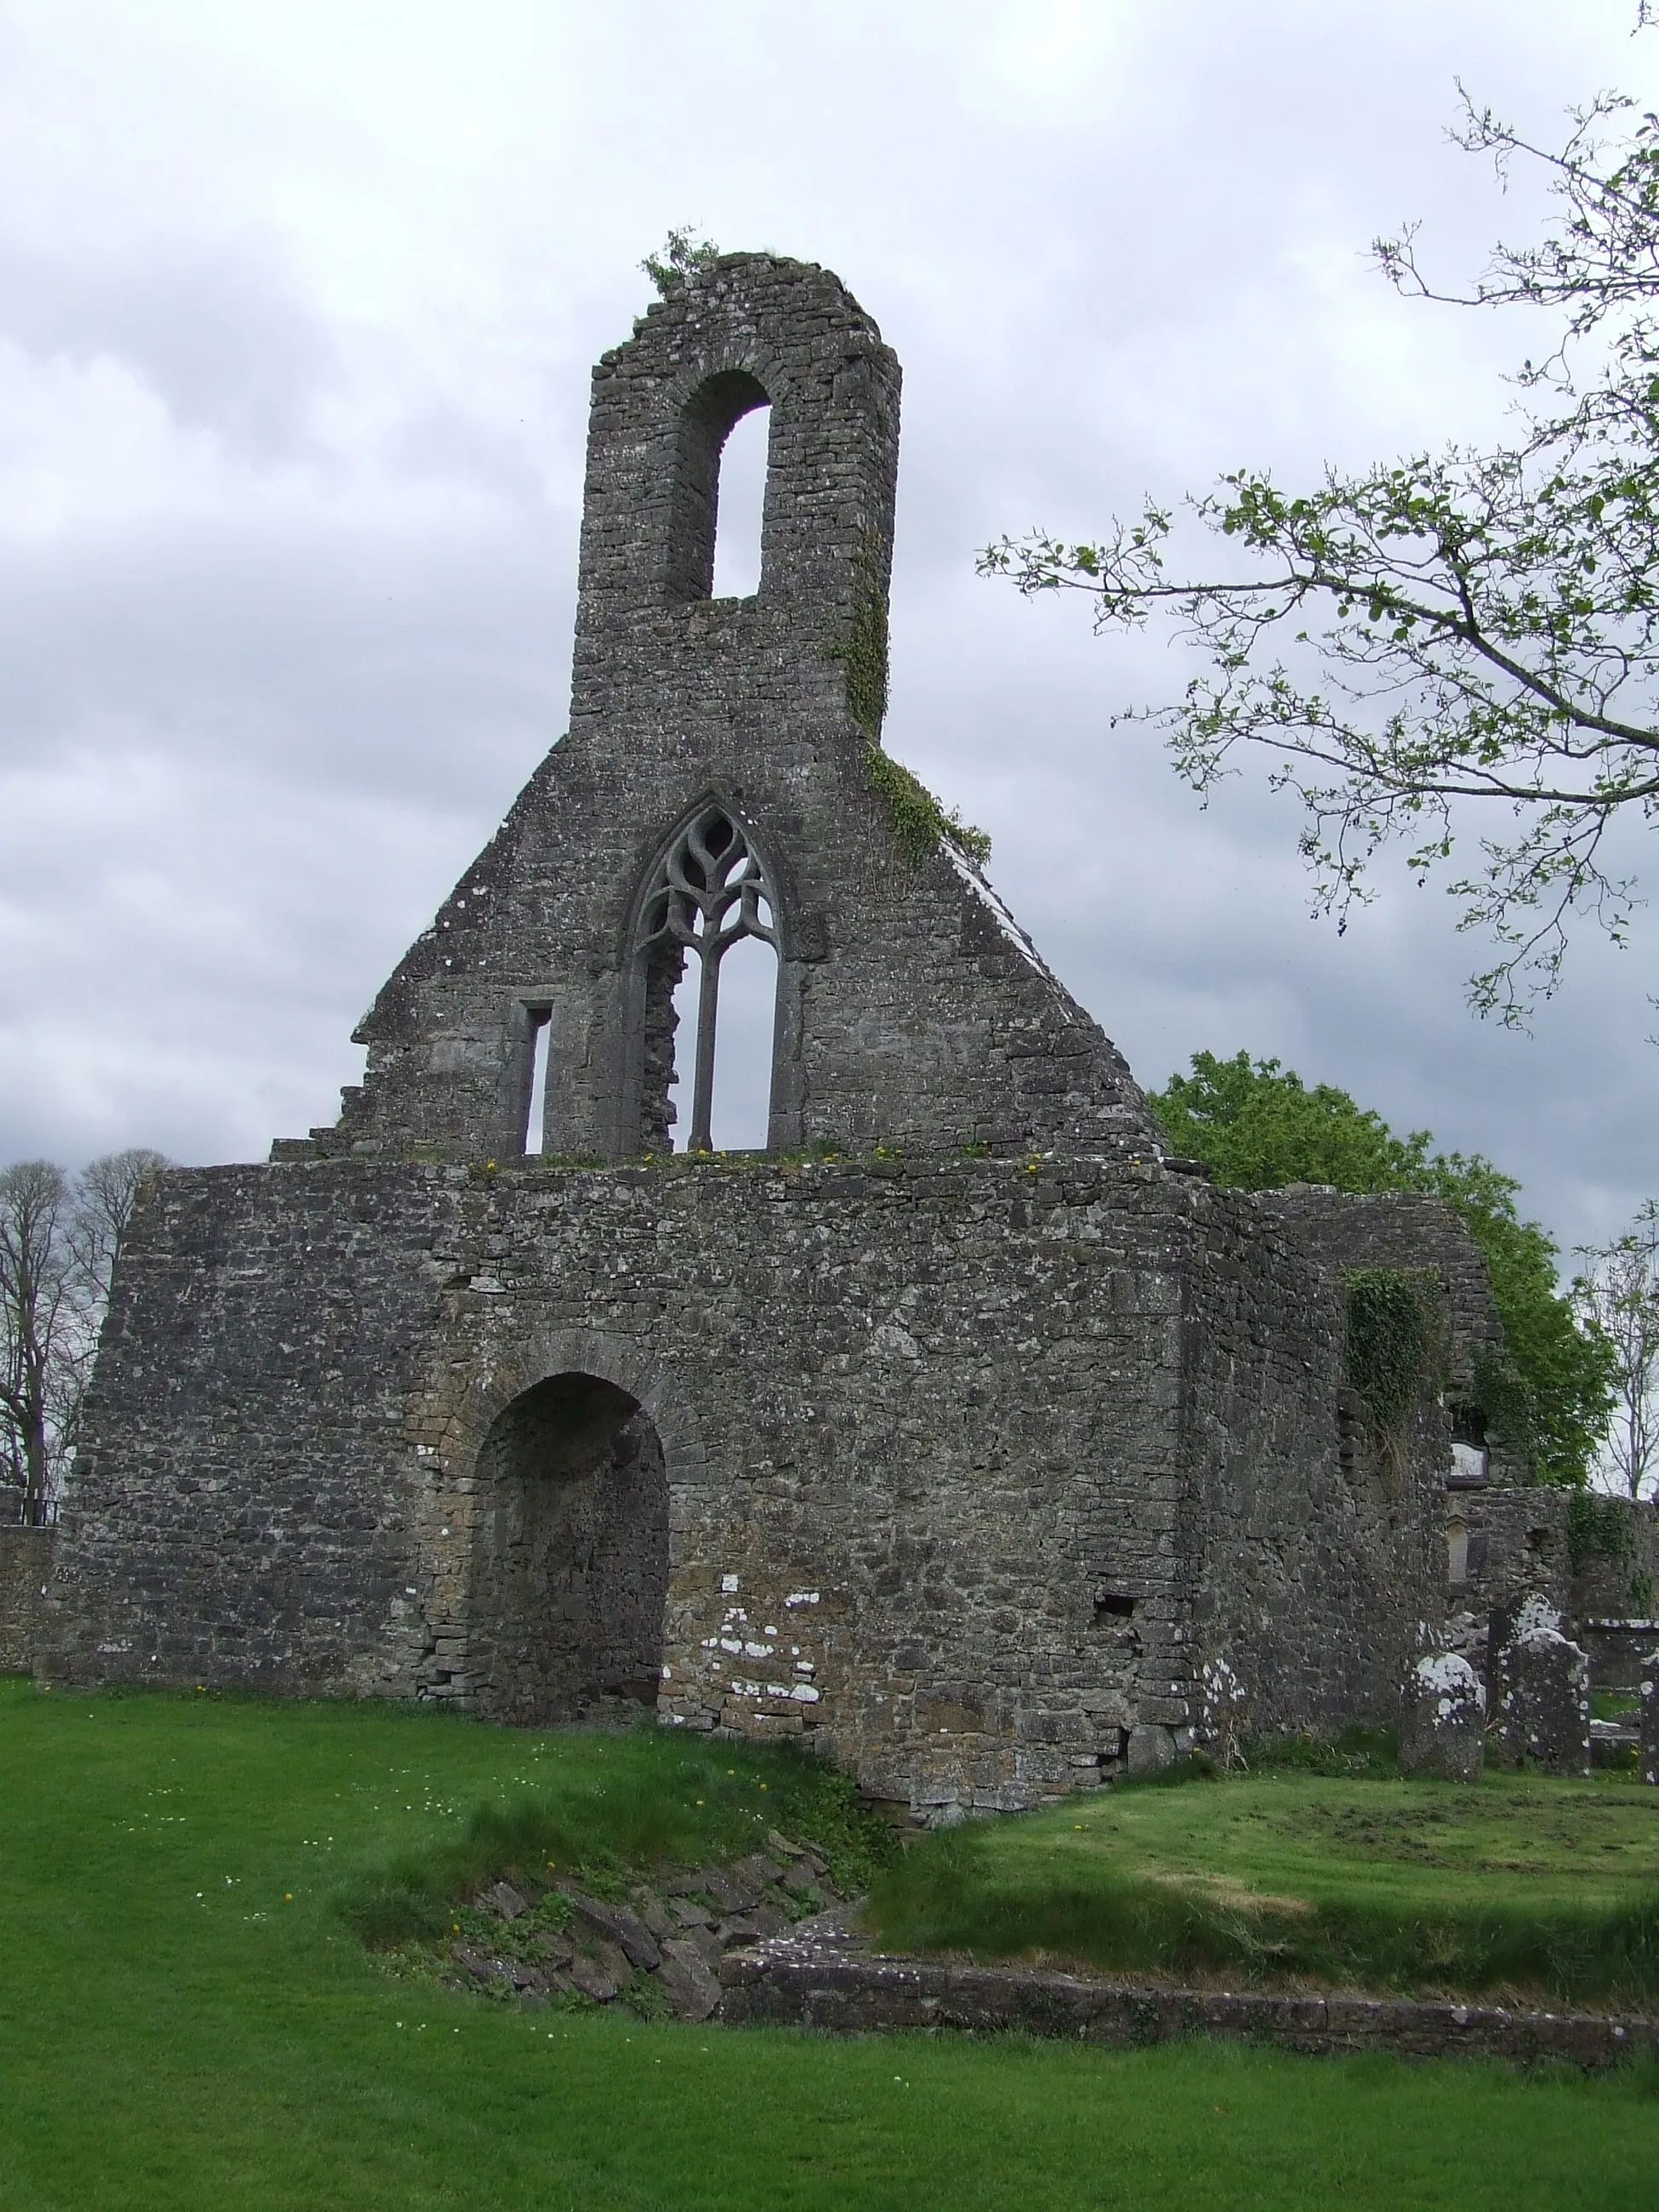 Photo showing: The west entrance of the "Big Church" or "Abbey" churuch of the eponymous town of Templemore, located in the present Town Park.